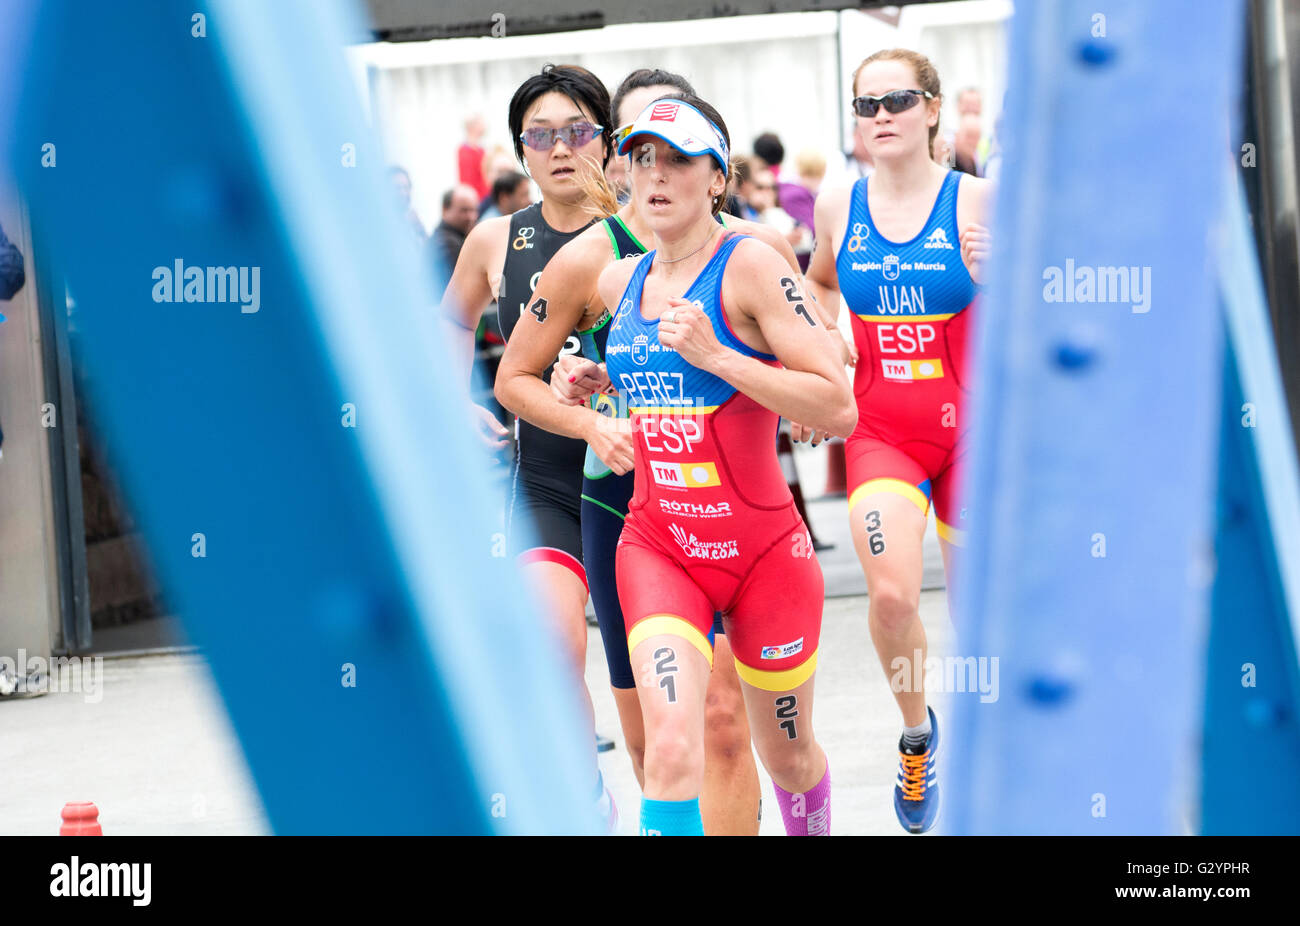 Aviles, Spain. 4th June, 2016. Lucia Perez (Spain) leaders a small group during the race of women elite & U-23 categories of 2016 Aviles ITU Duathlon World Championships at Center Niemeyer on June 4, 2016 in Aviles, Spain. Credit: David Gato/Alamy Live News Stock Photo